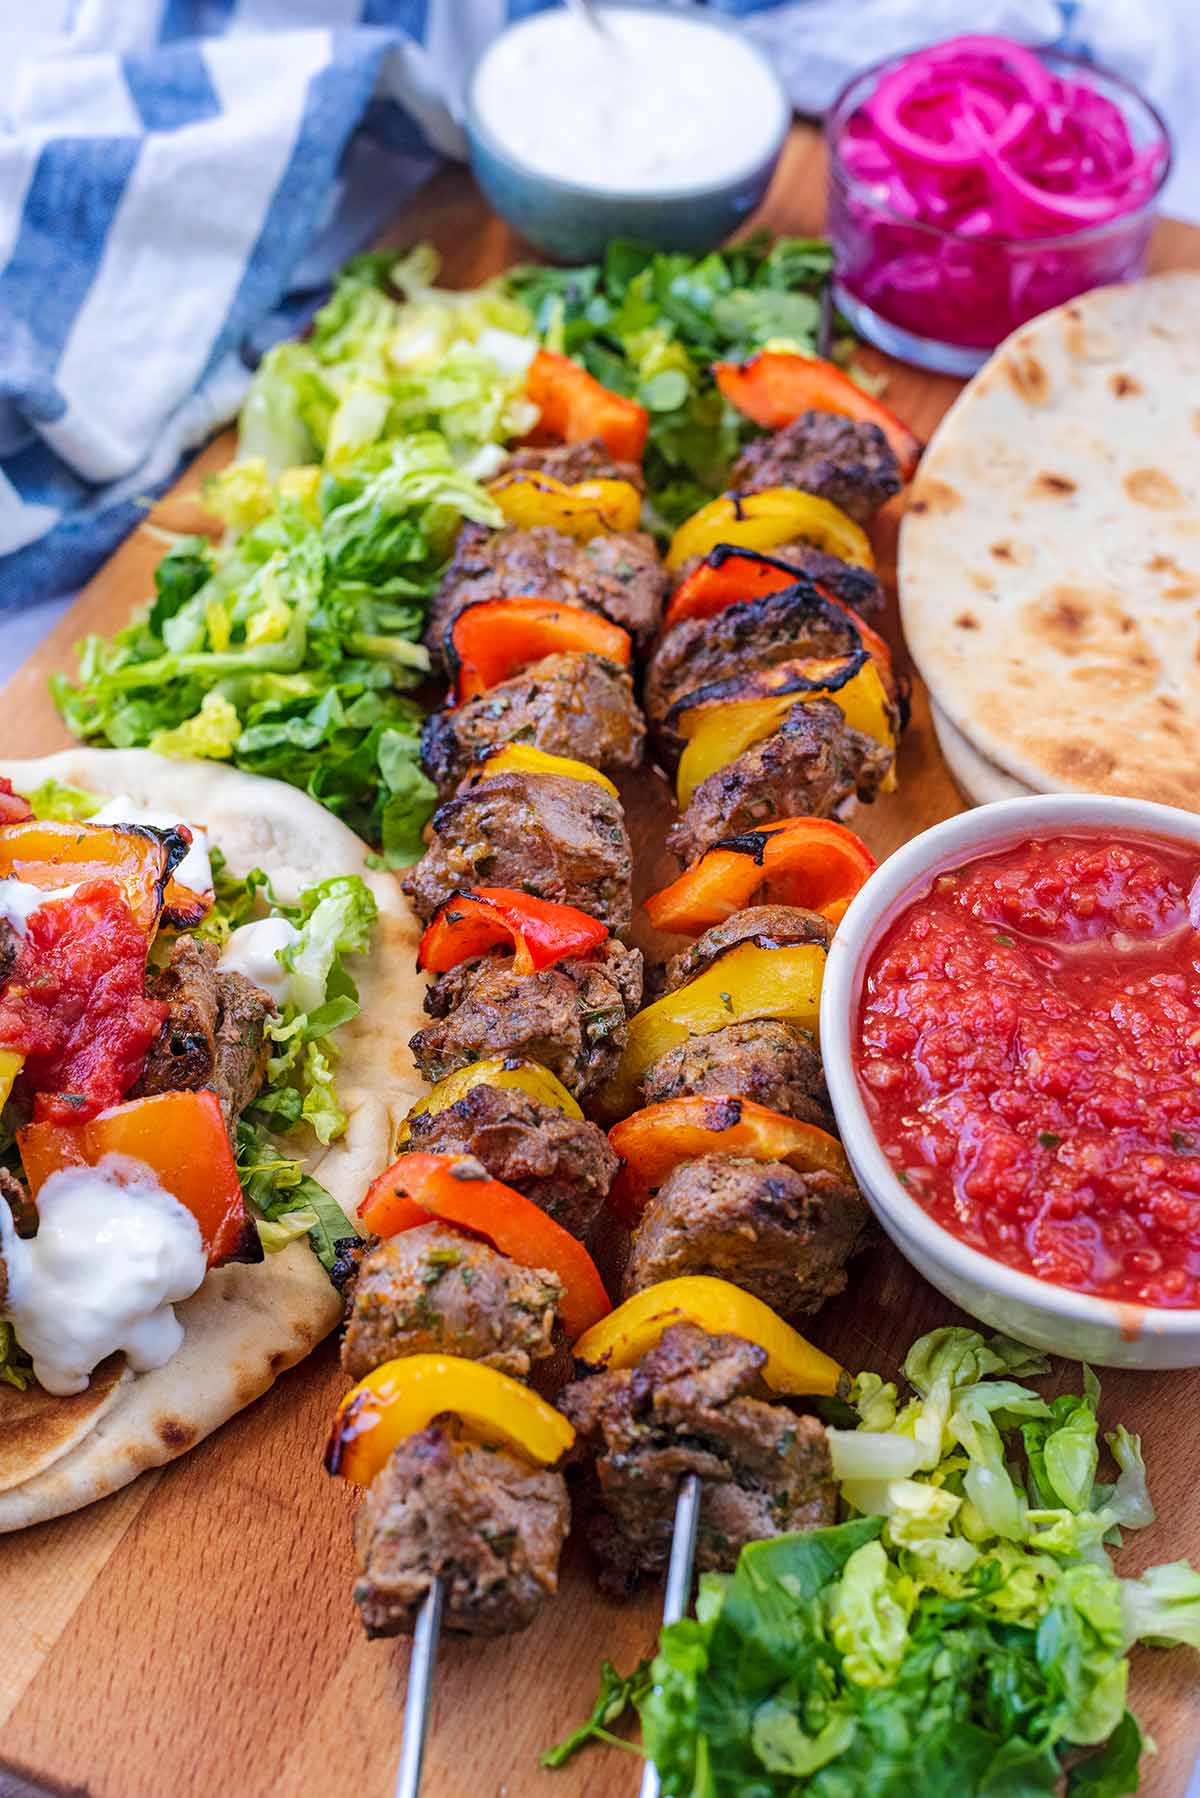 Shish kebabs on a board with flat breads and chilli sauce.